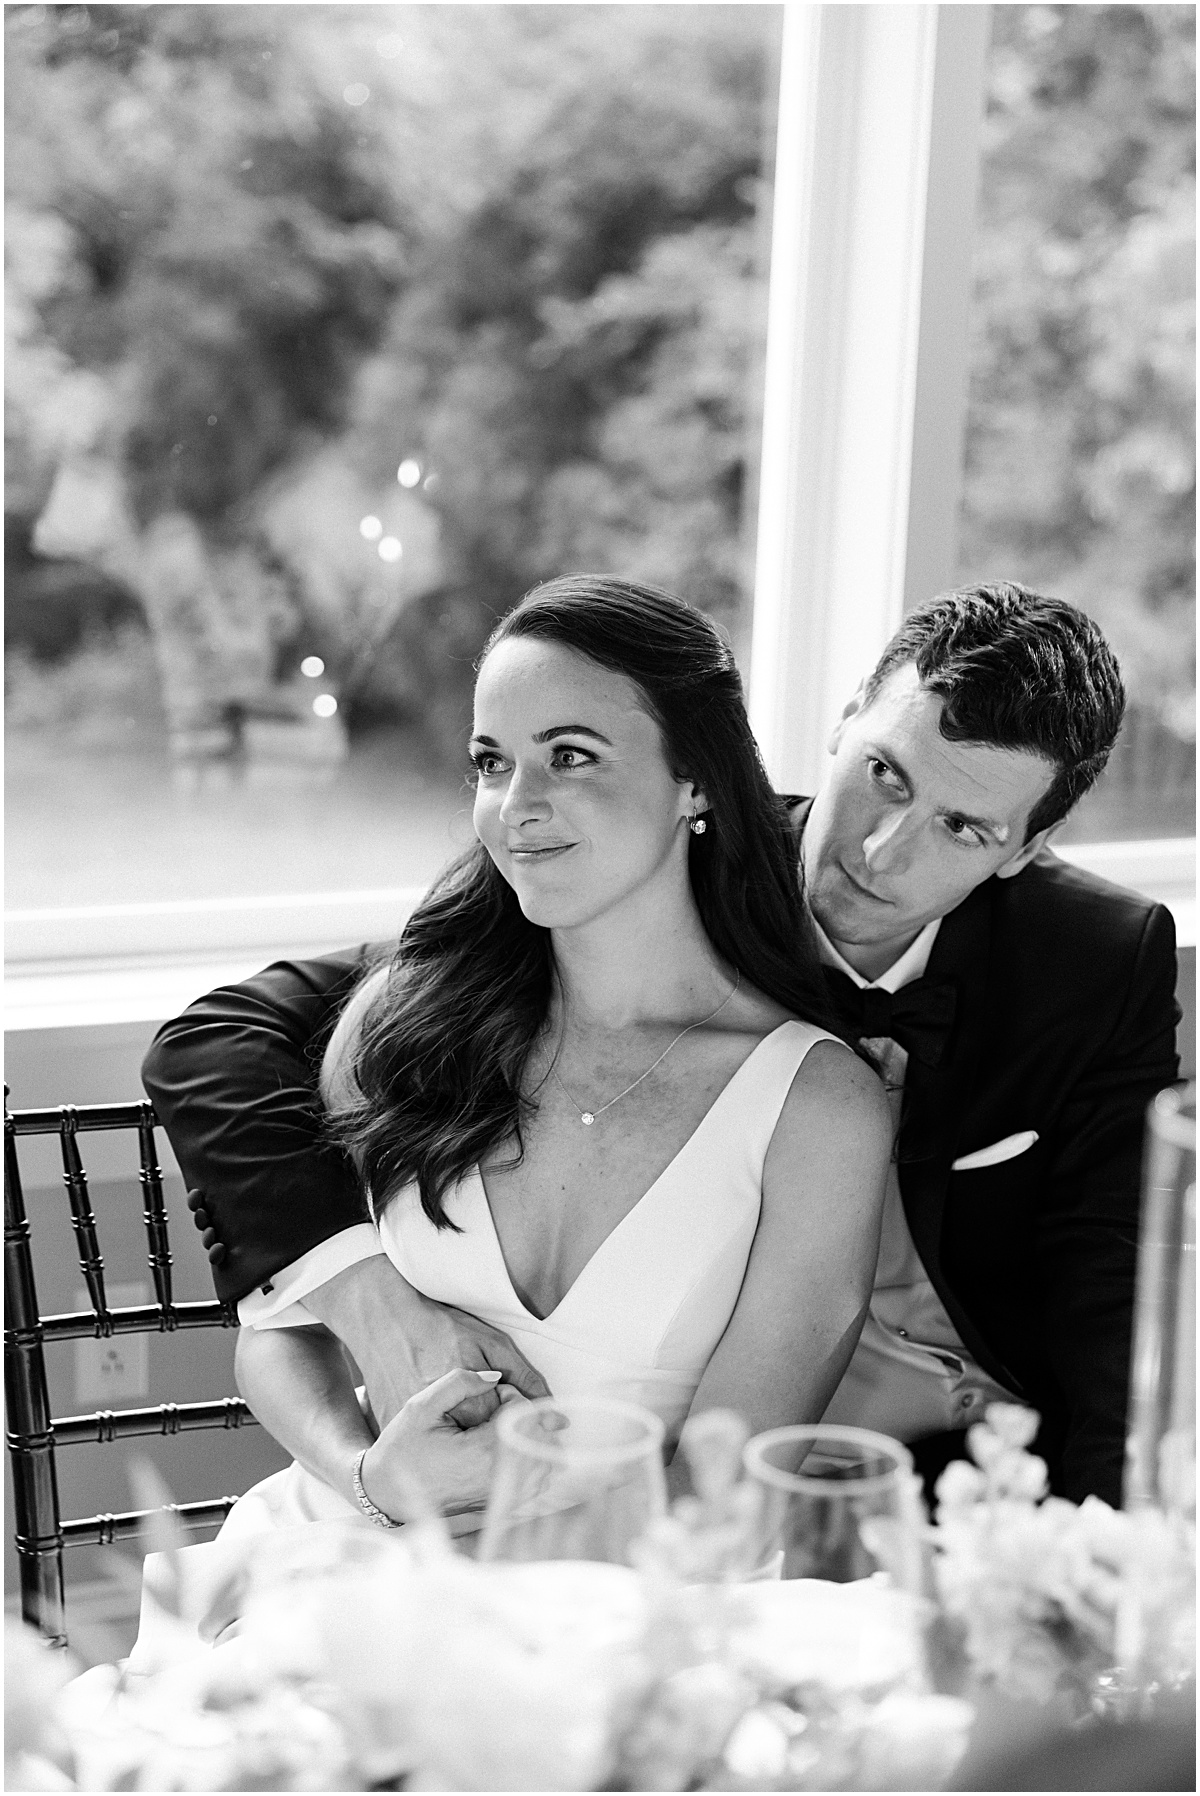 The couple at dinner. Joyful summer wedding at the Inn at Willow Grove by Sarah Bradshaw. Planning by Kelley Cannon Events.